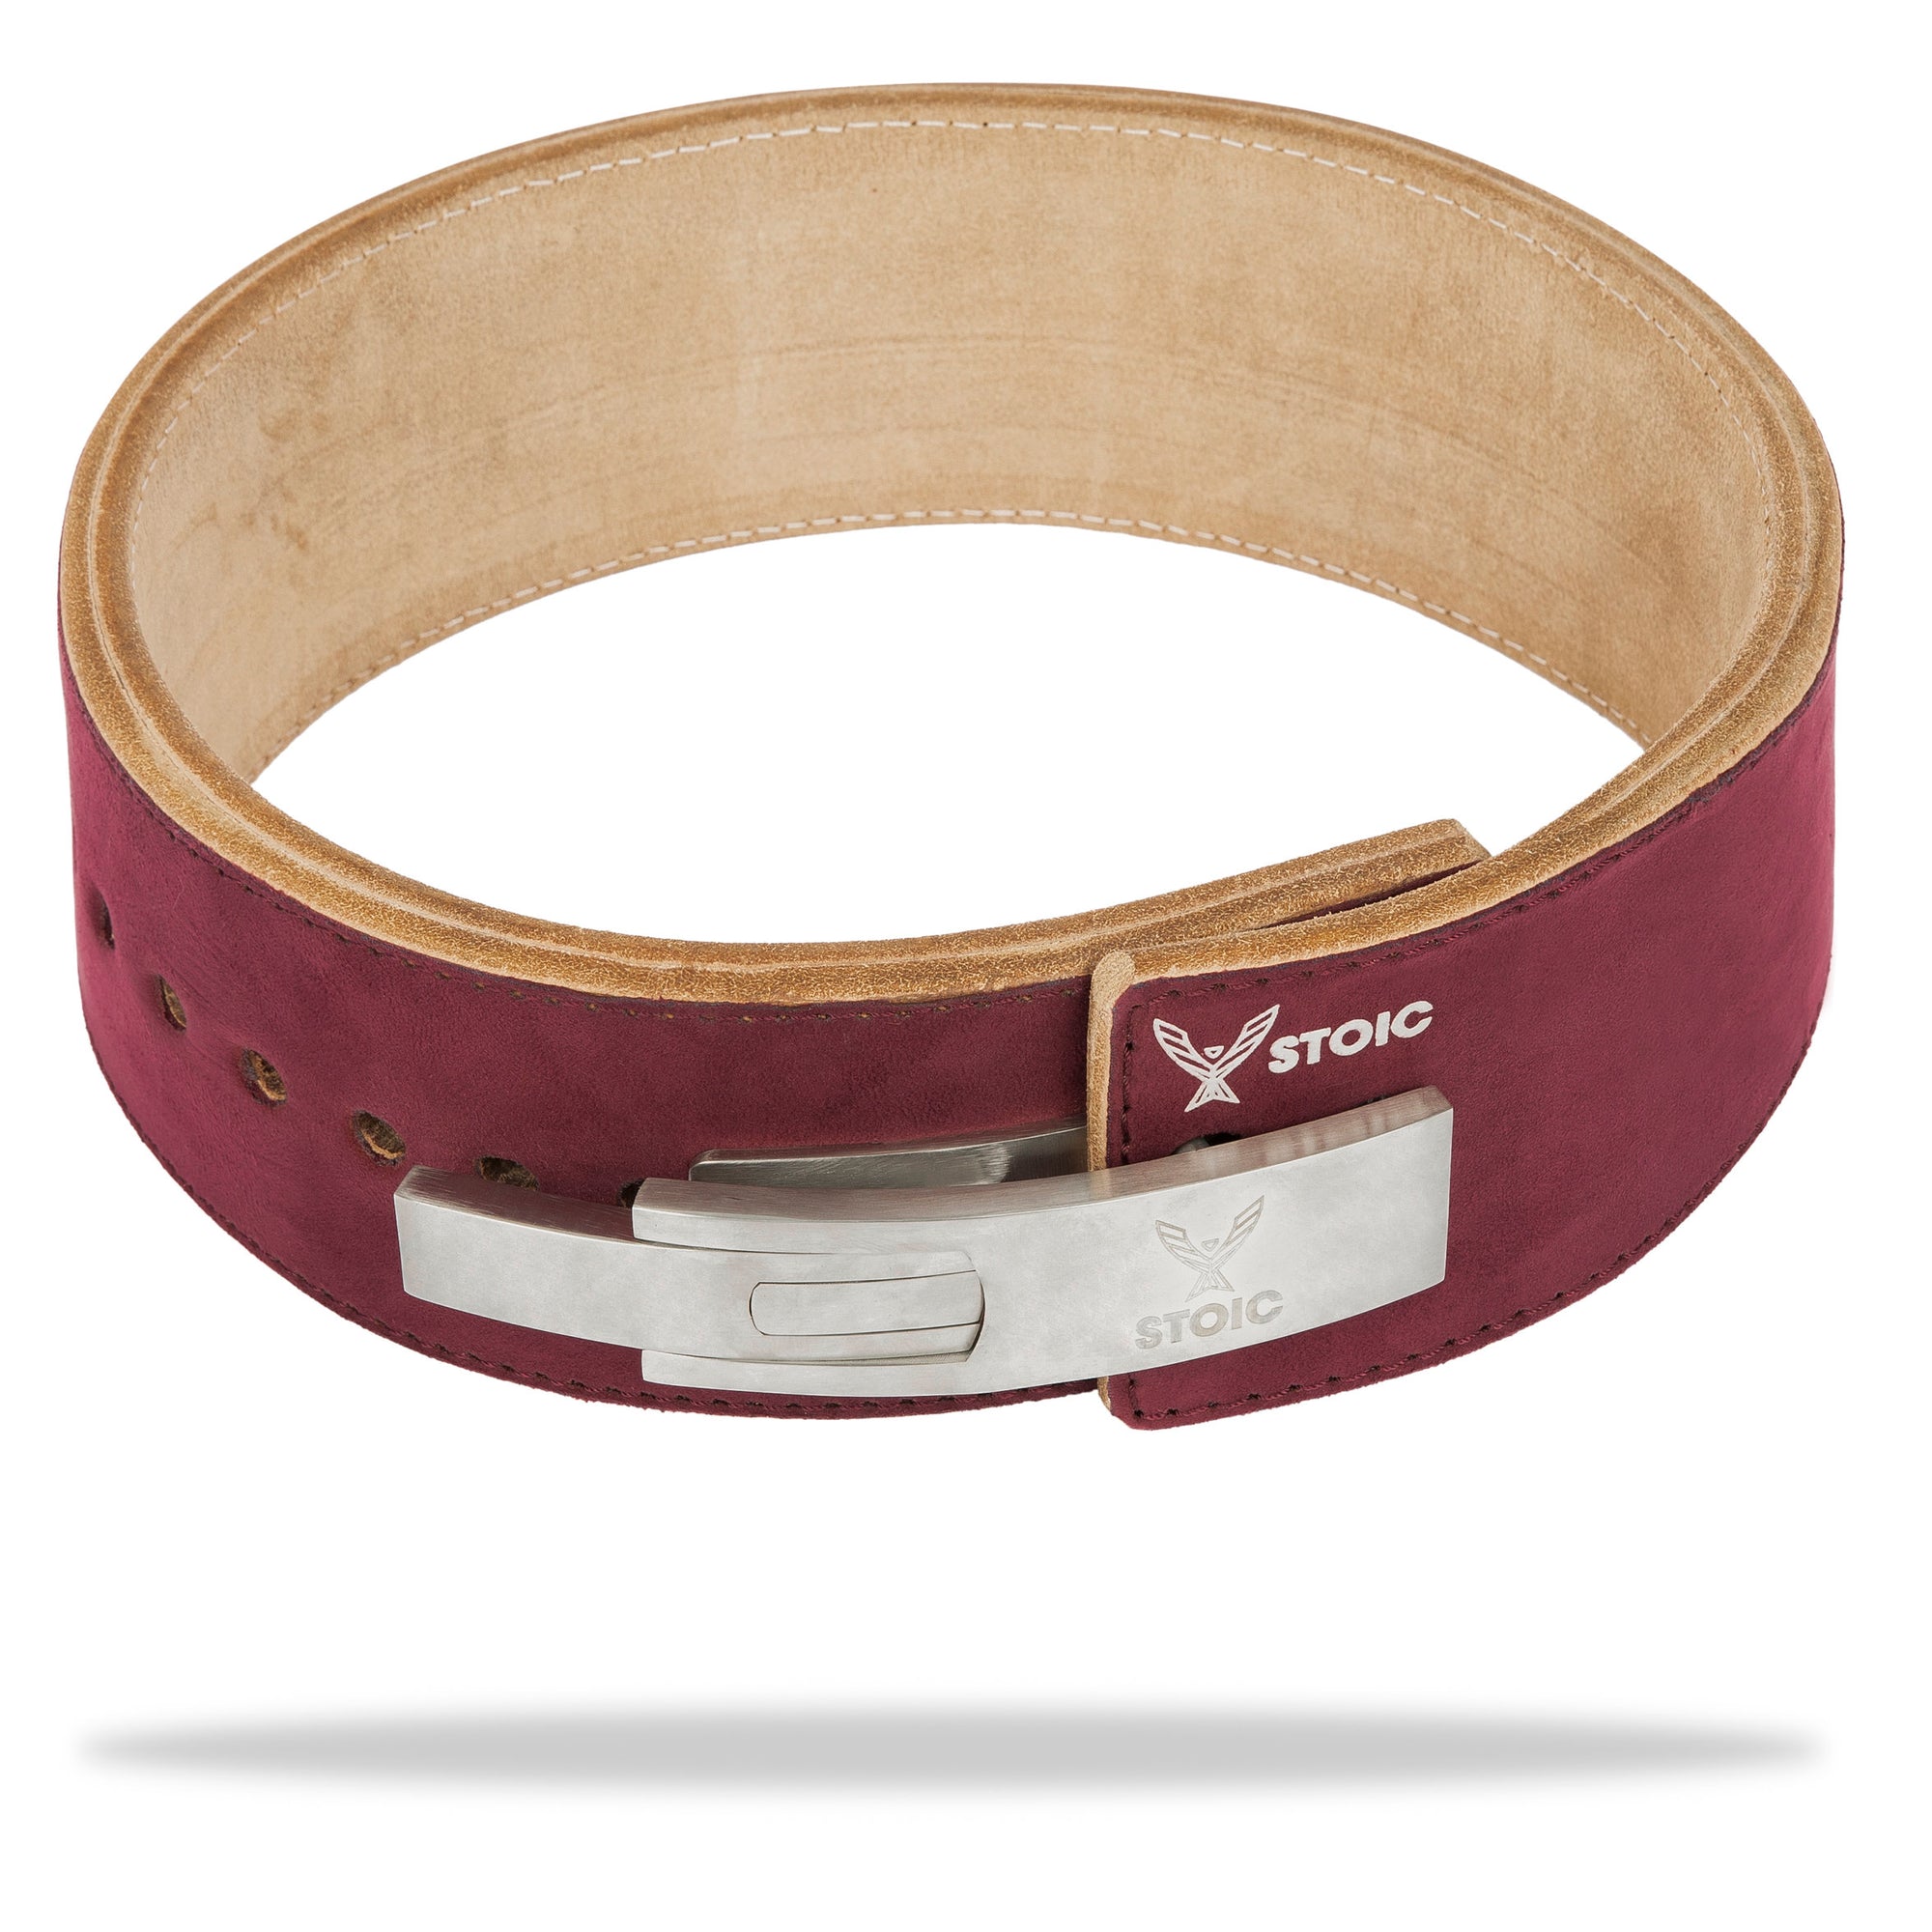 Stoic Lever Powerlifting Belt (13mm) - Maroon